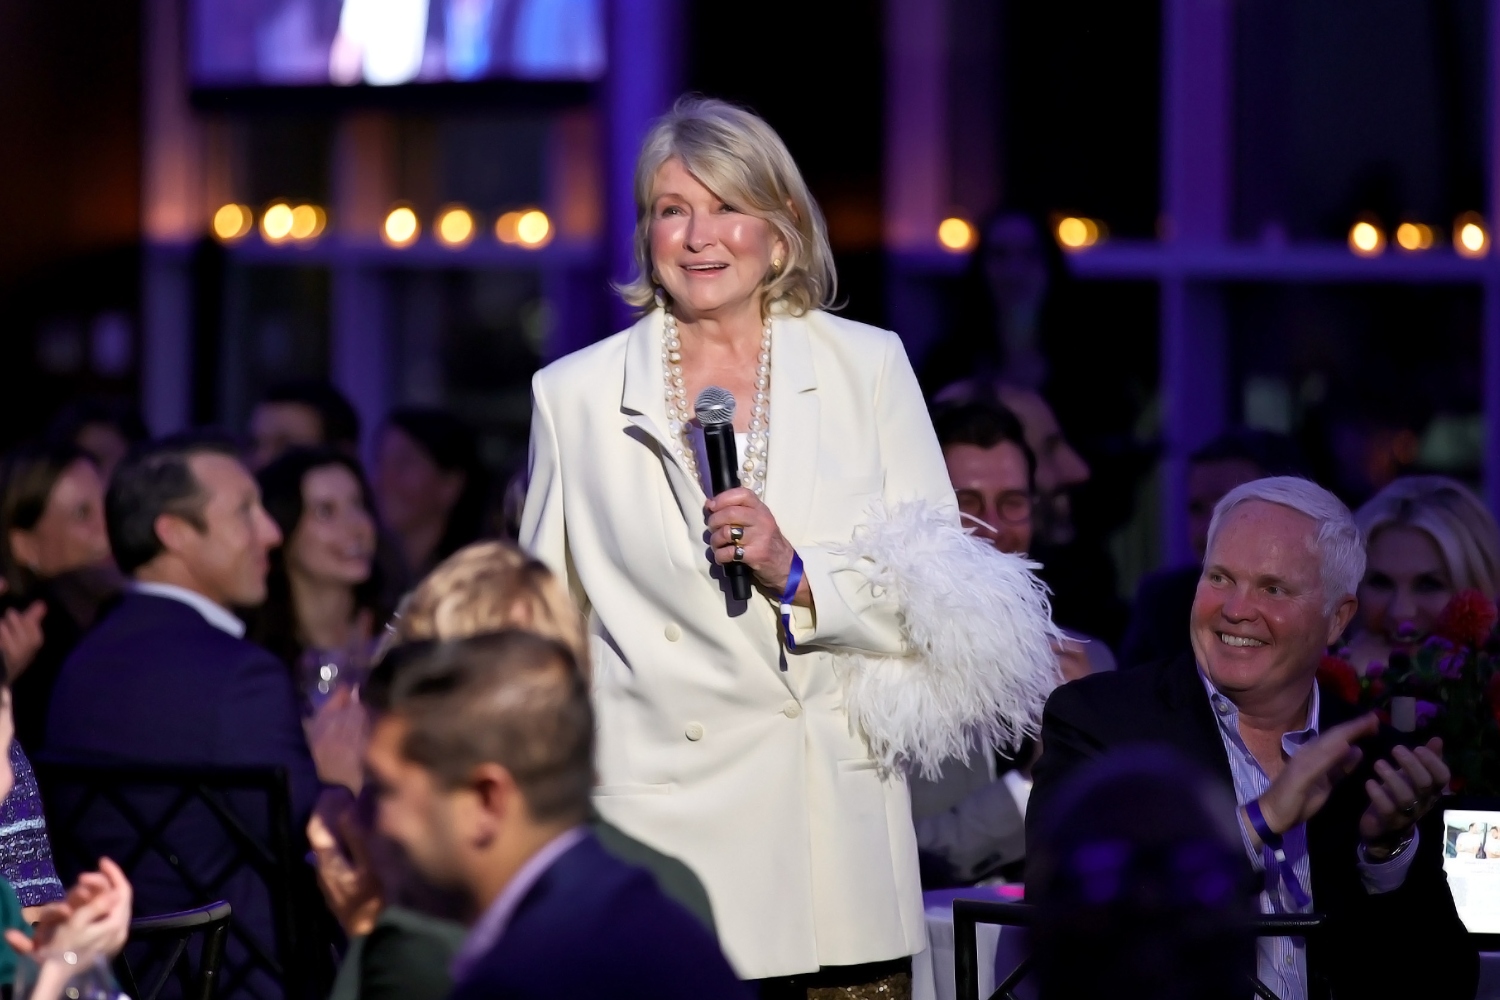 Martha Stewart speaks at the 2021 Hudson River Park Gala at Pier Sixty at Chelsea Piers on October 07, 2021 in New York City